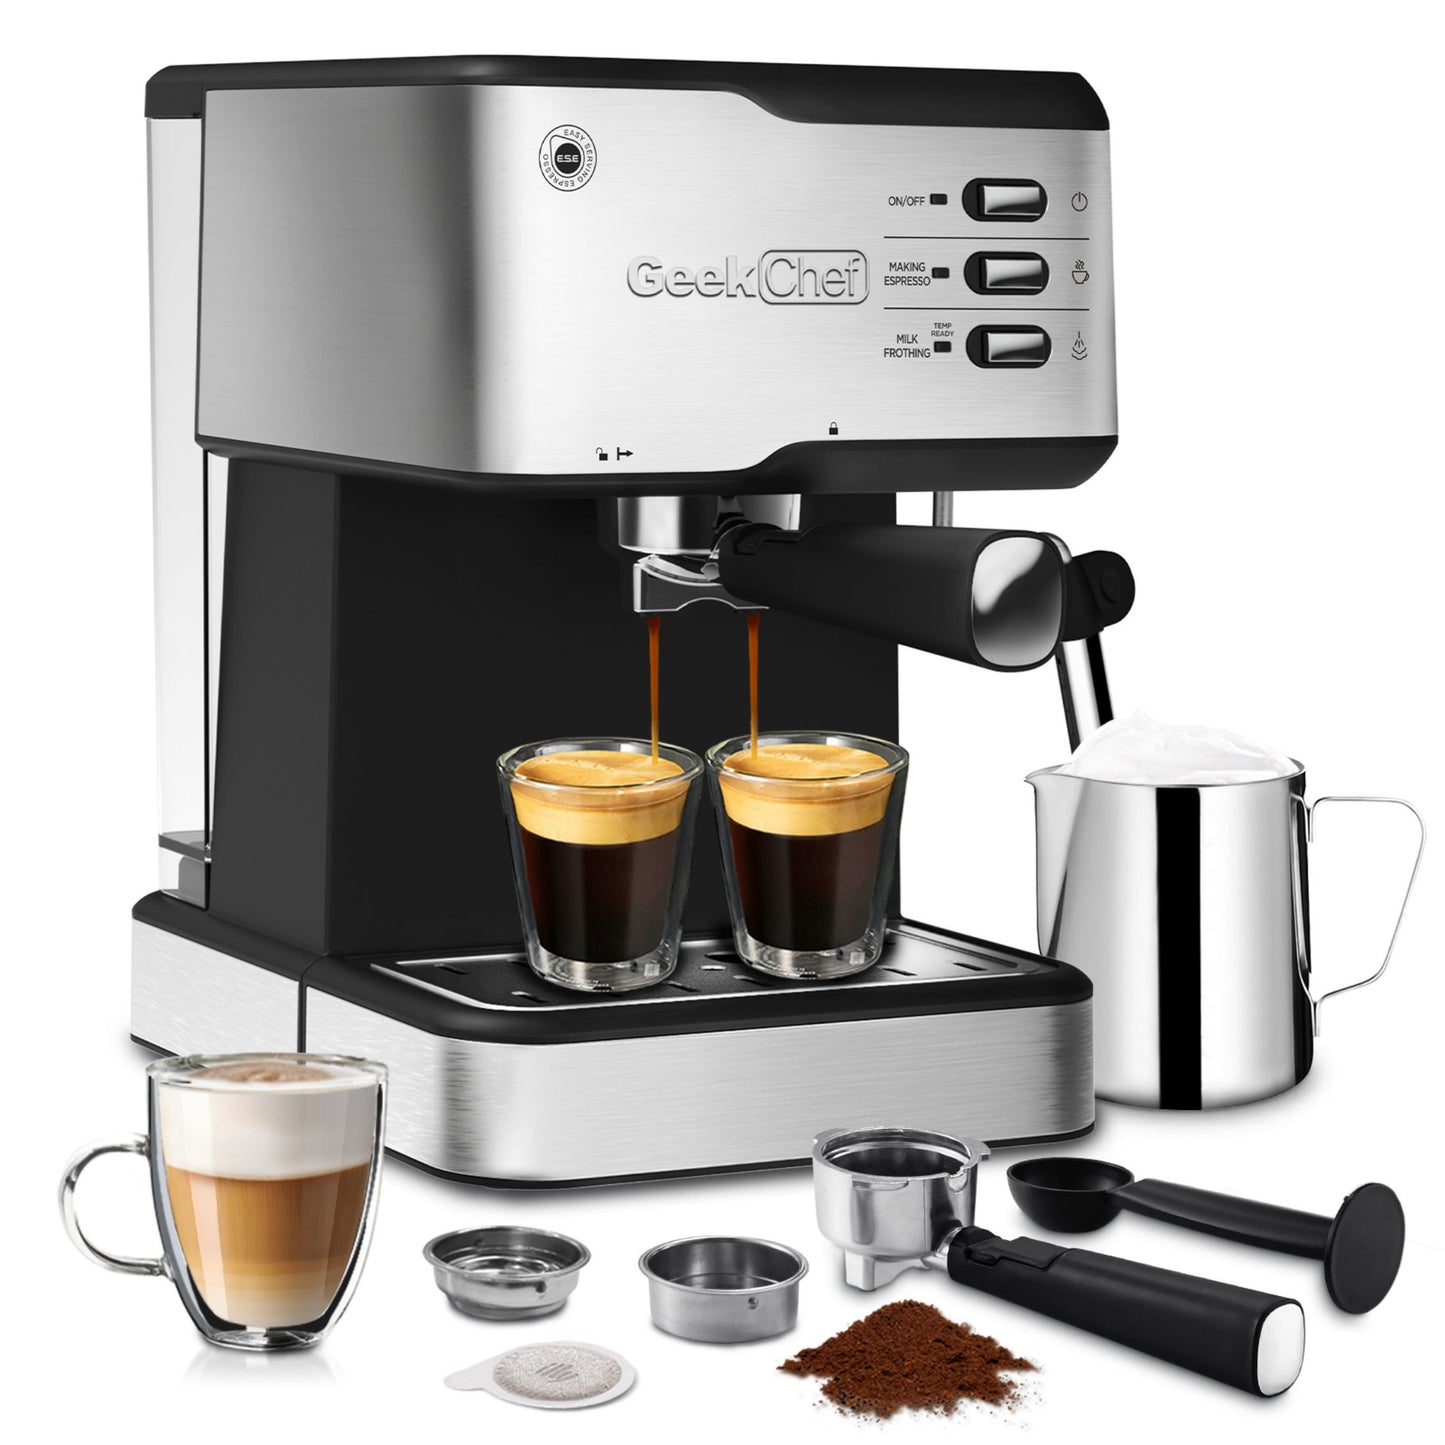 Geek Chef Coffee Espresso Machine,20 BarPump Pressure Espresso and Cappuccino latte Maker with Milk Frother Steam Wand, 1.45L WaterTank,950W,Complimentary ESE Filter